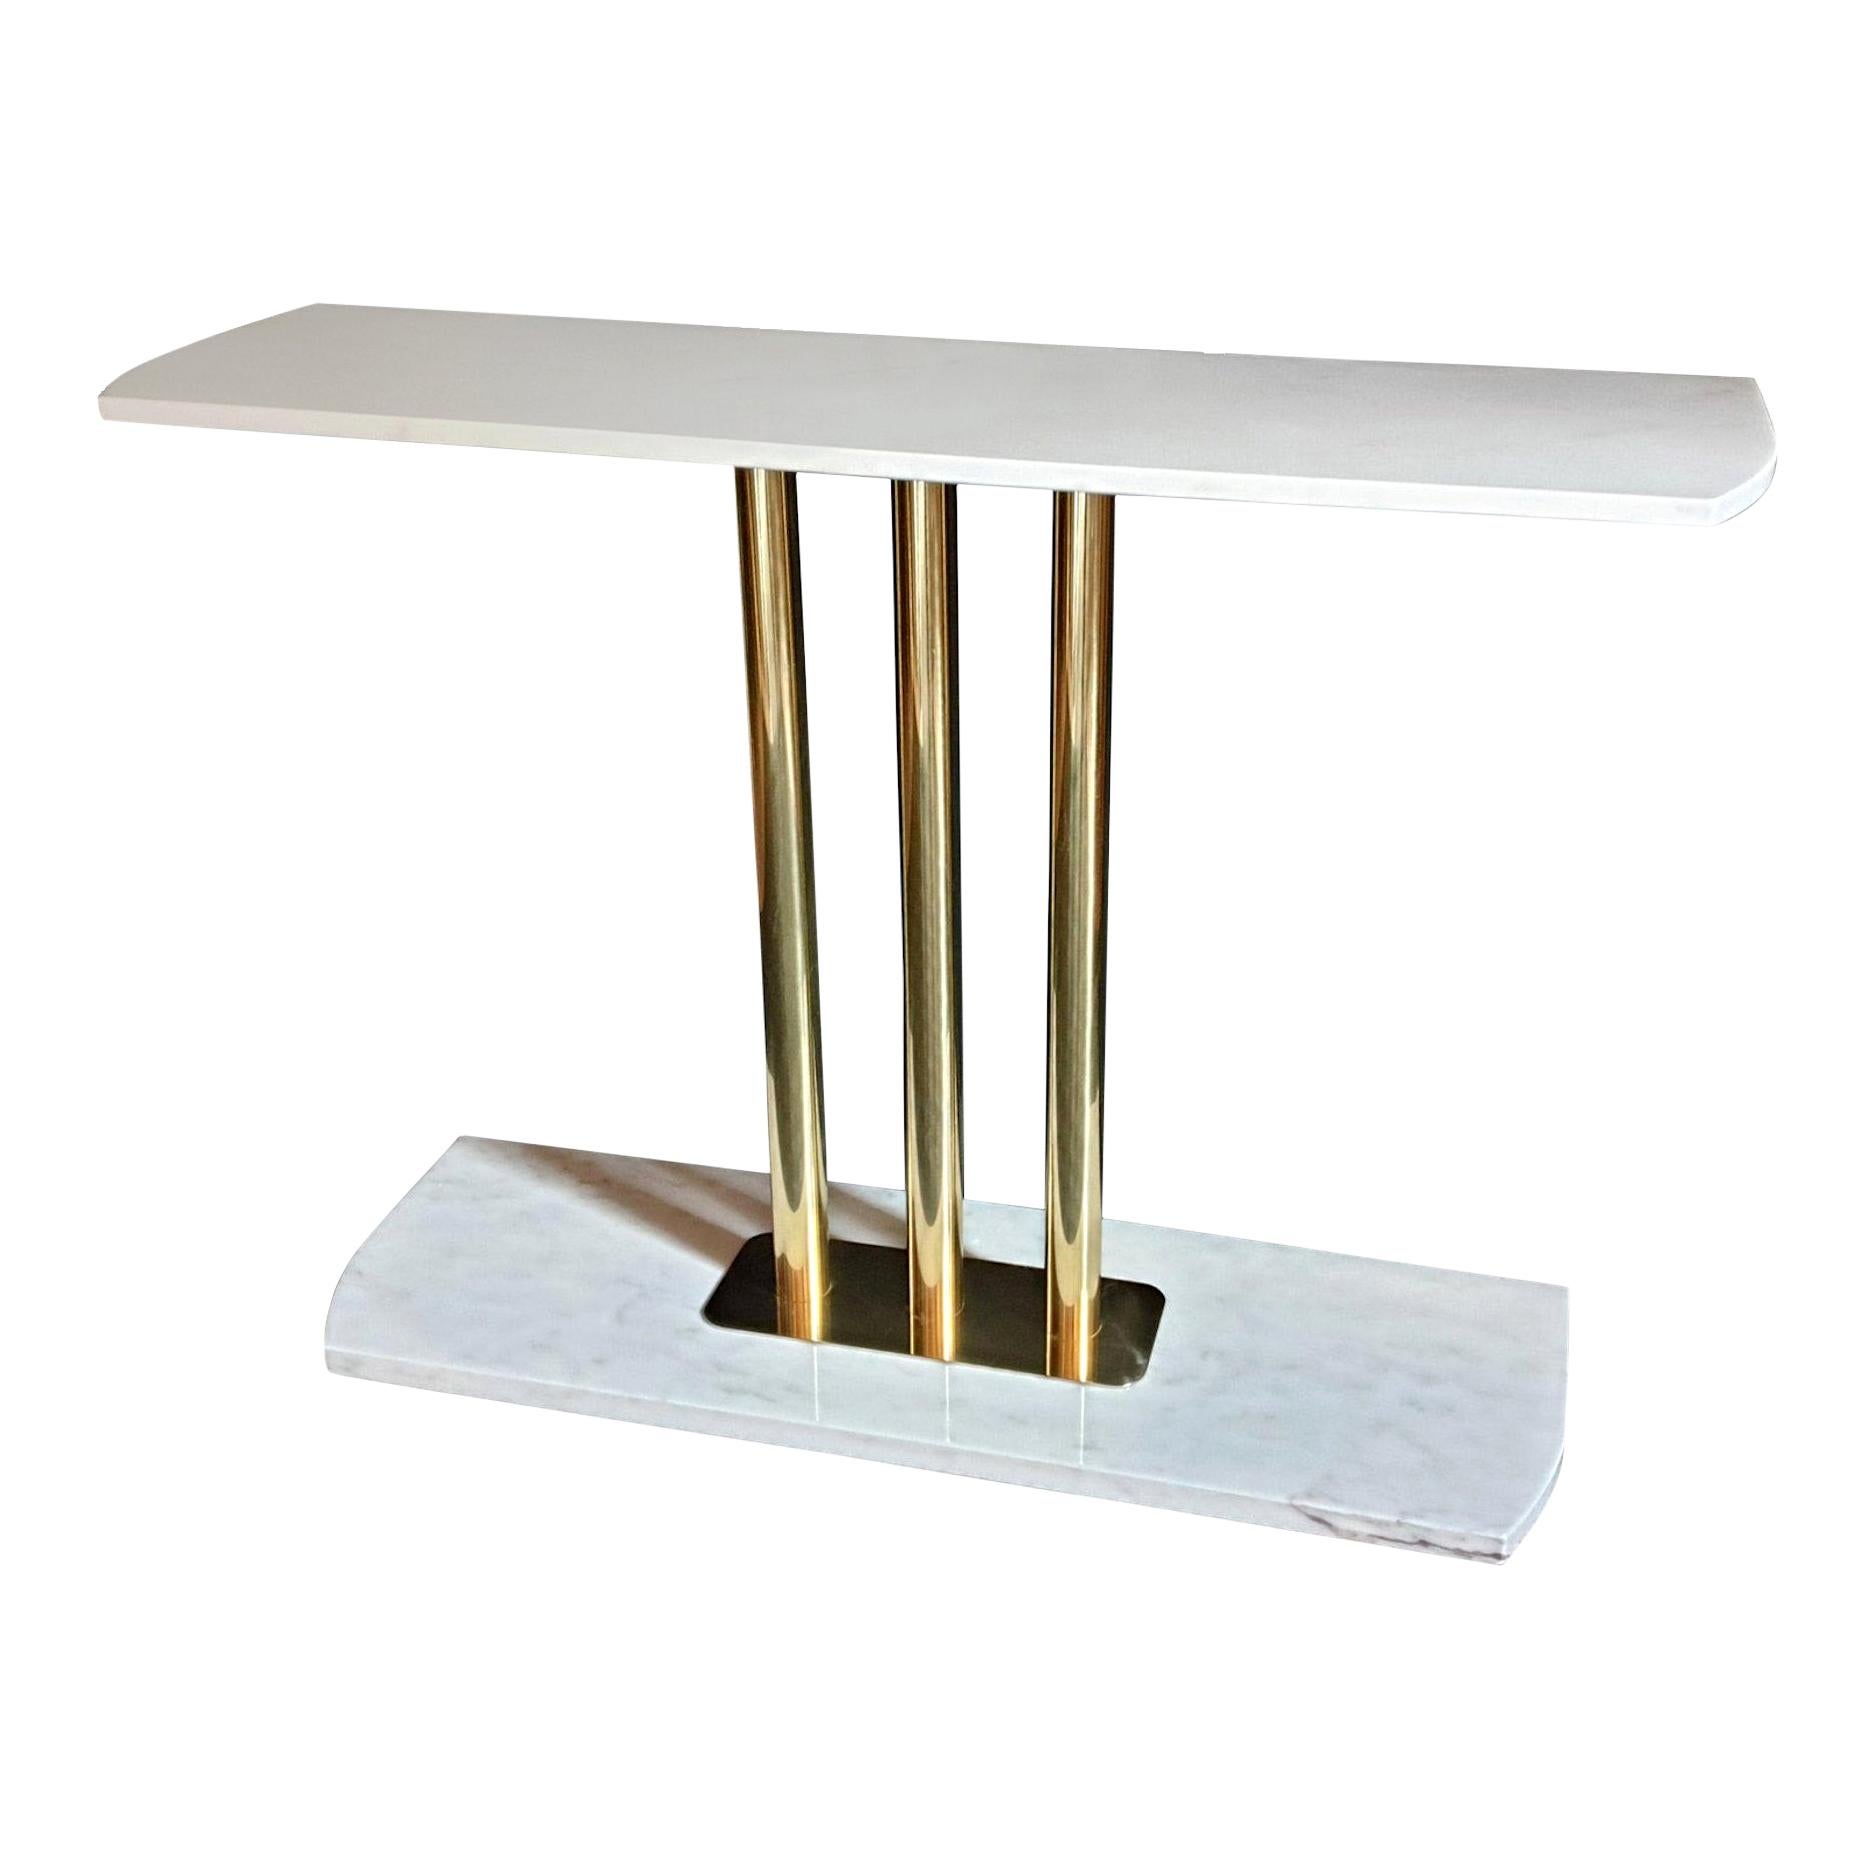 White and Gray Carrara Marble and Brass Mid-Century Modern Console Table, Italy